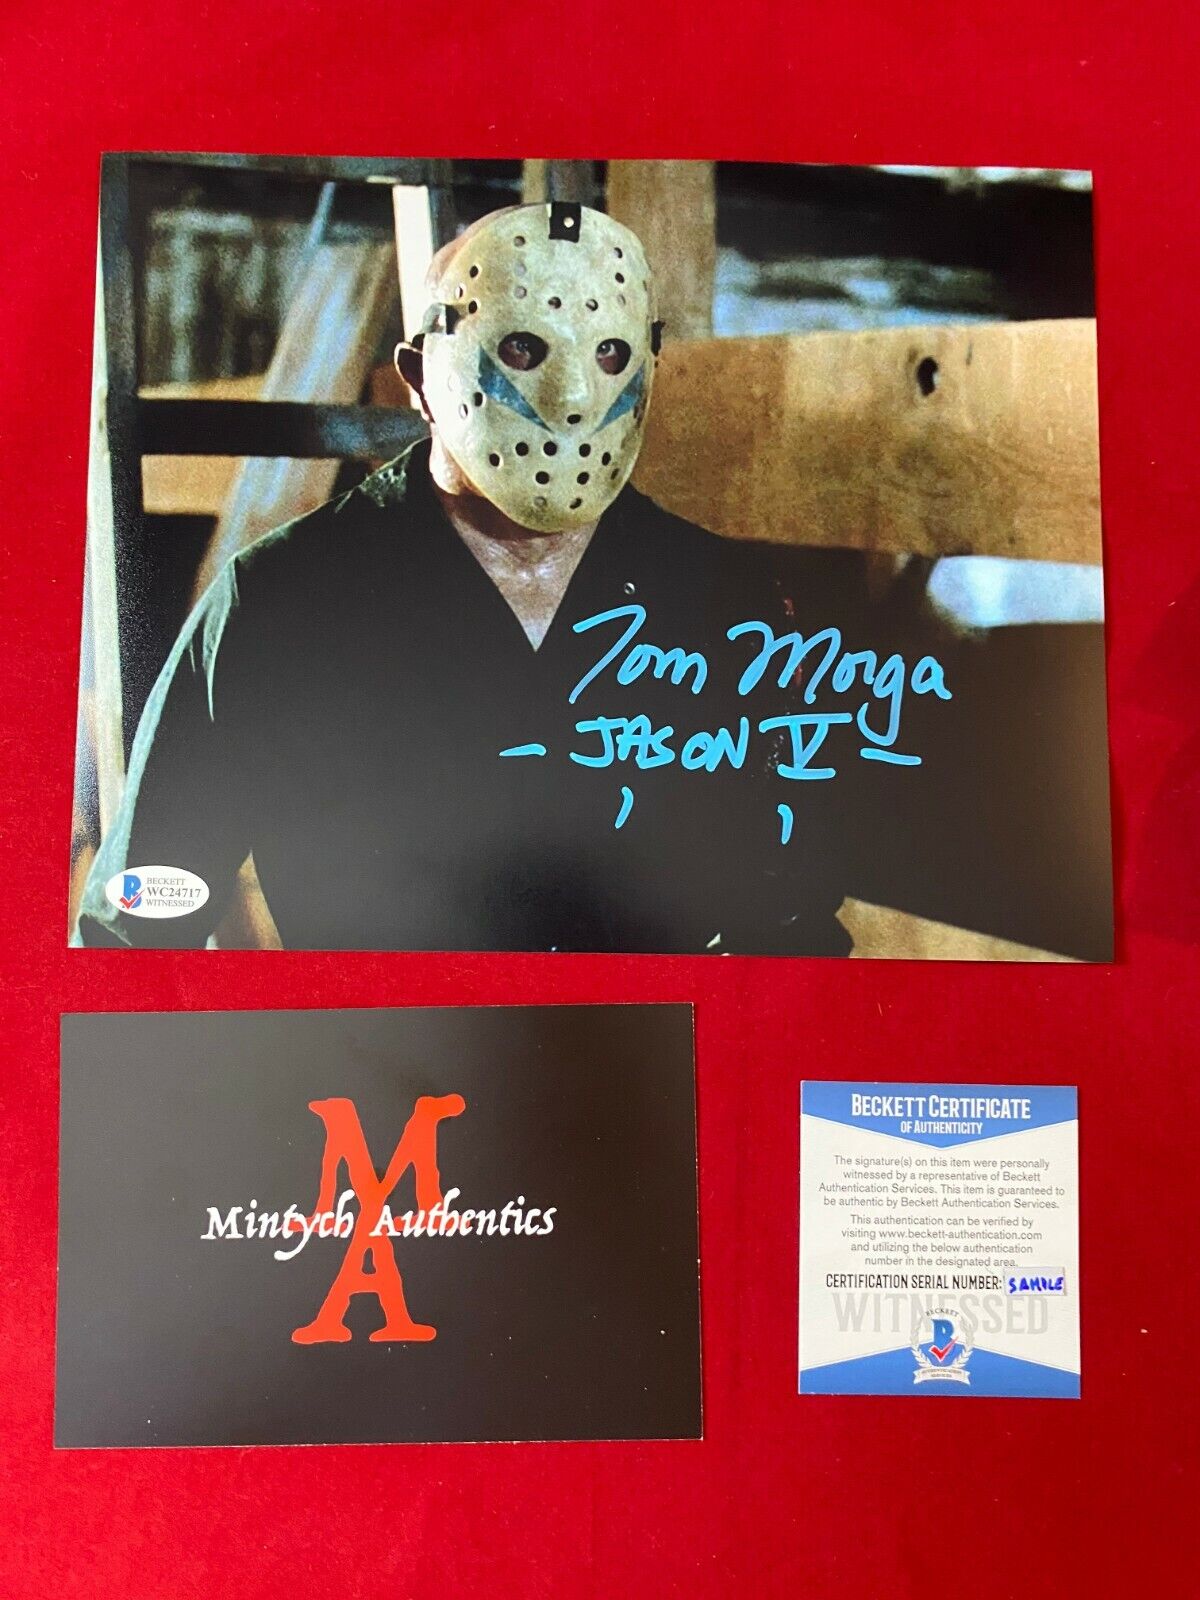 TOM MORGA AUTOGRAPHED SIGNED 8x10 Photo Poster painting! FRIDAY THE 13TH! JASON VOORHEES BECKETT